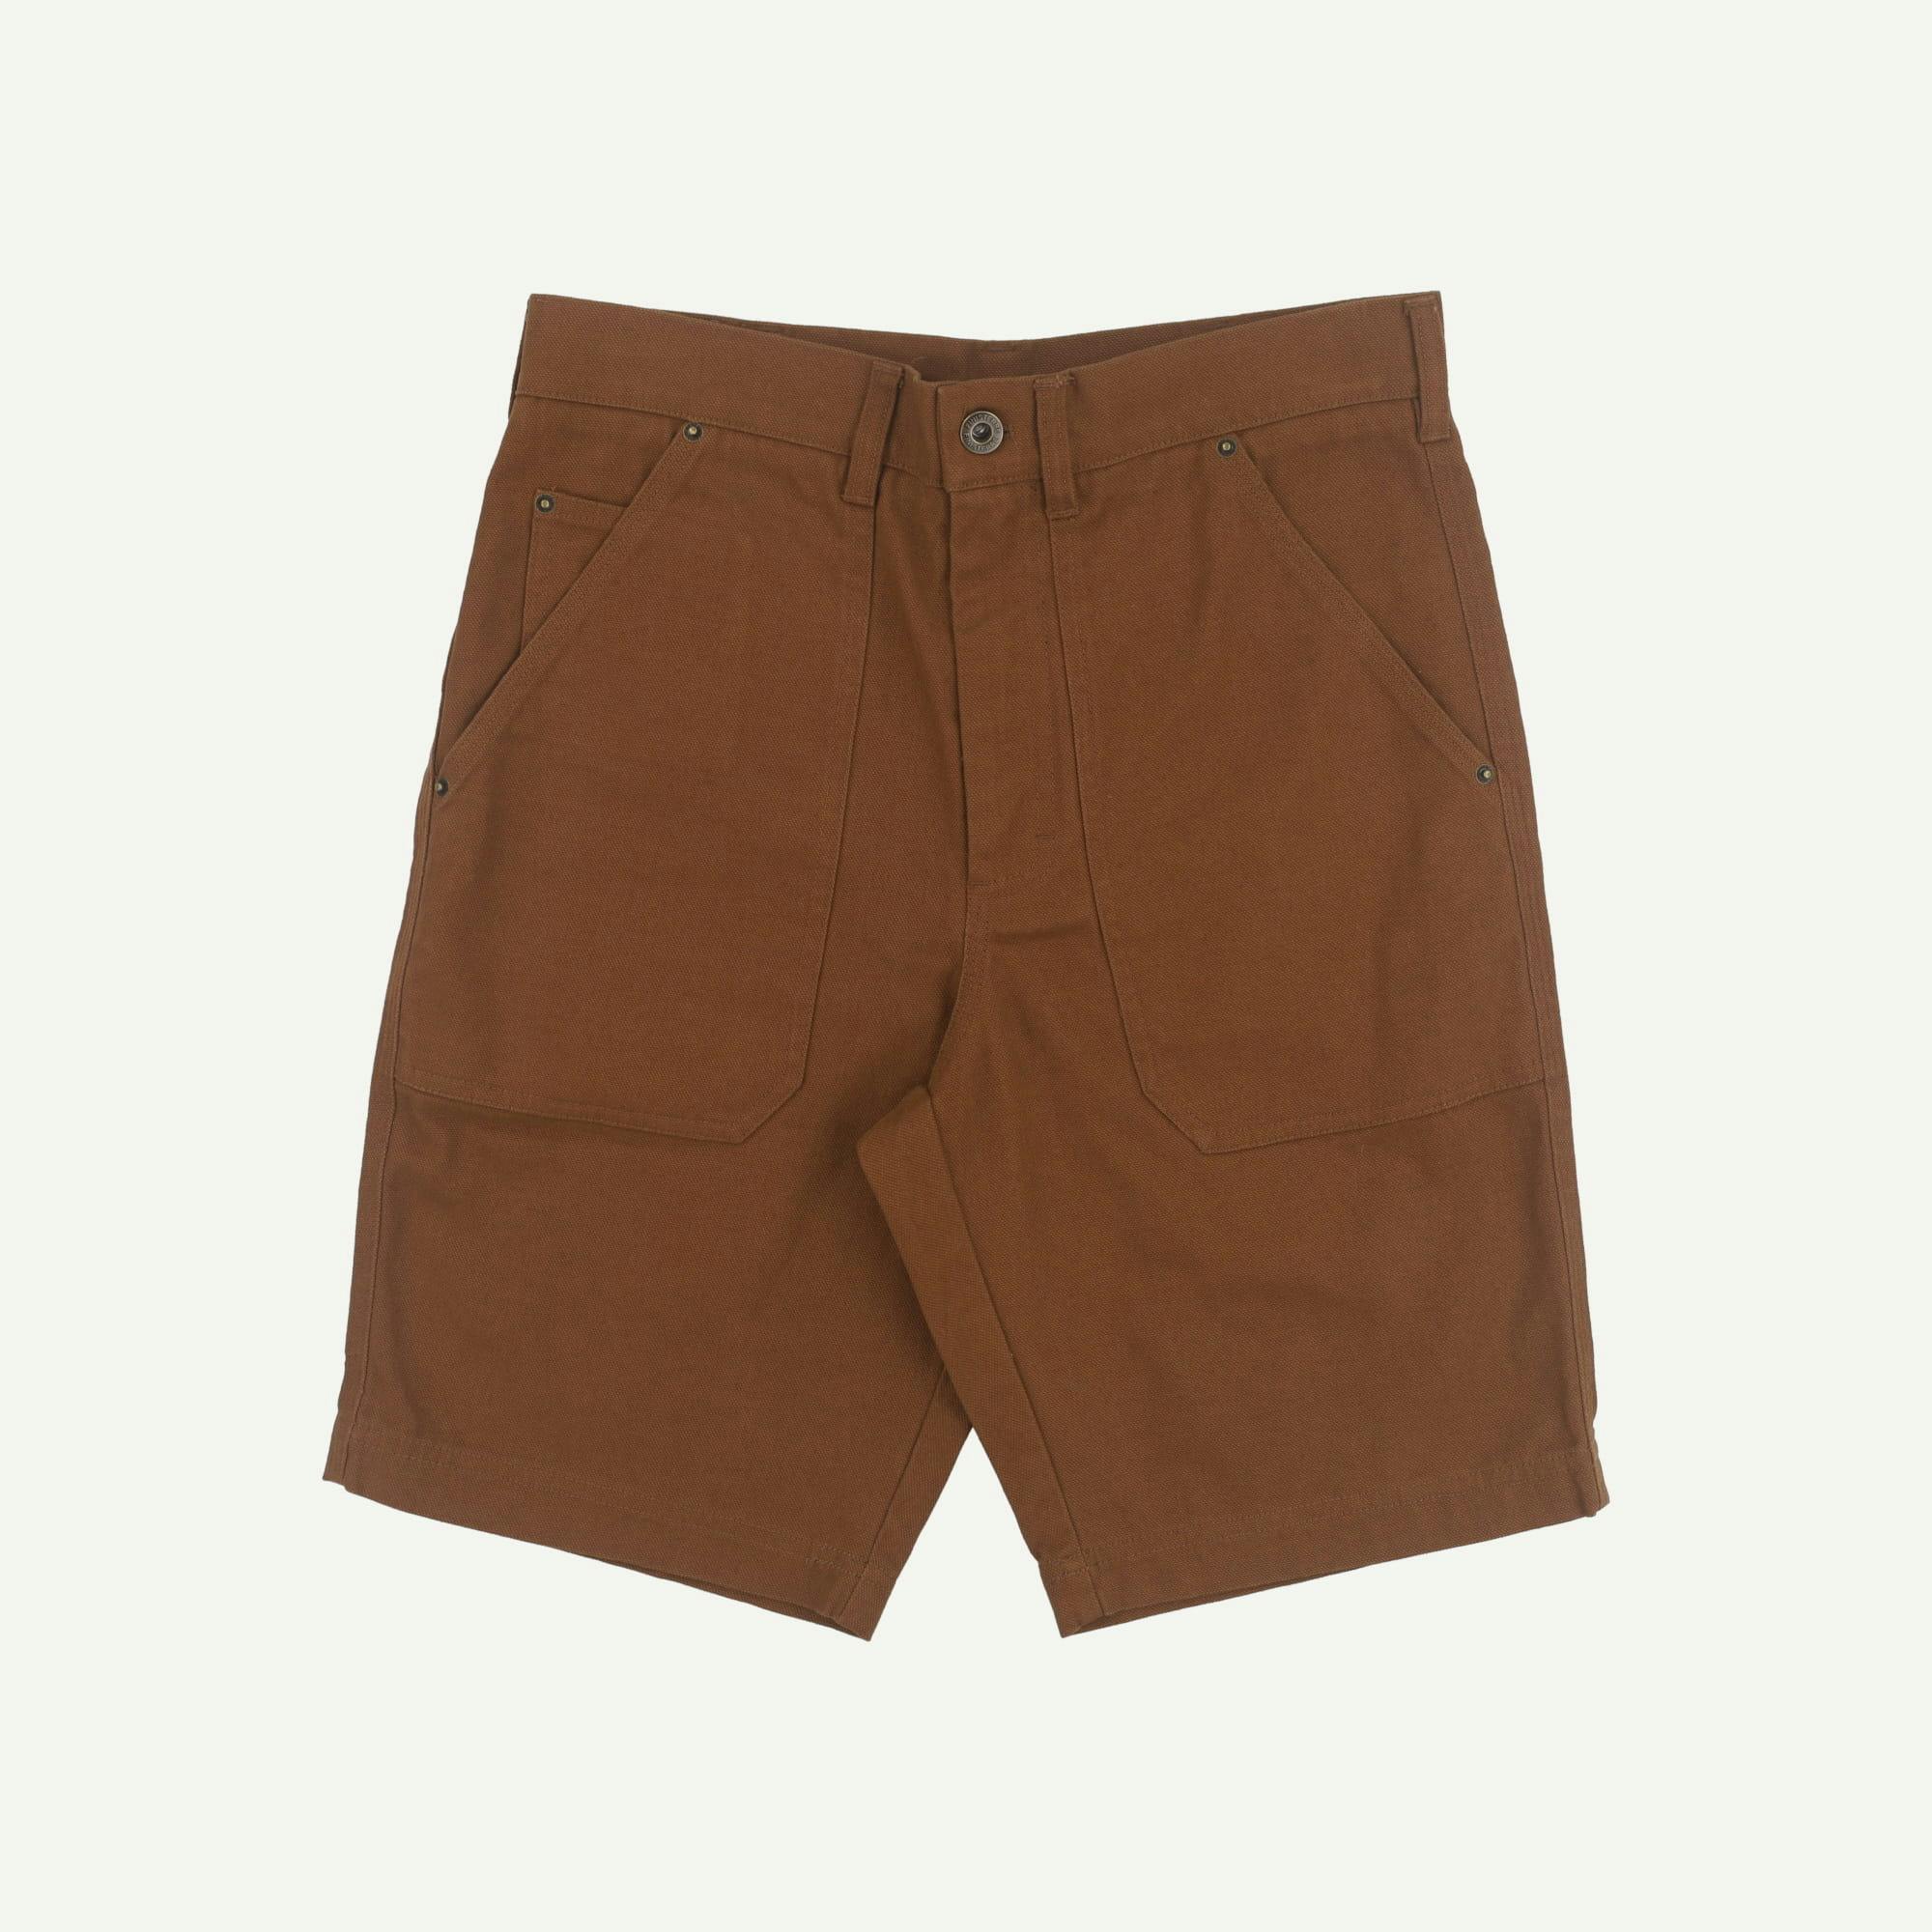 Finisterre Brand new Brown Basset Shorts